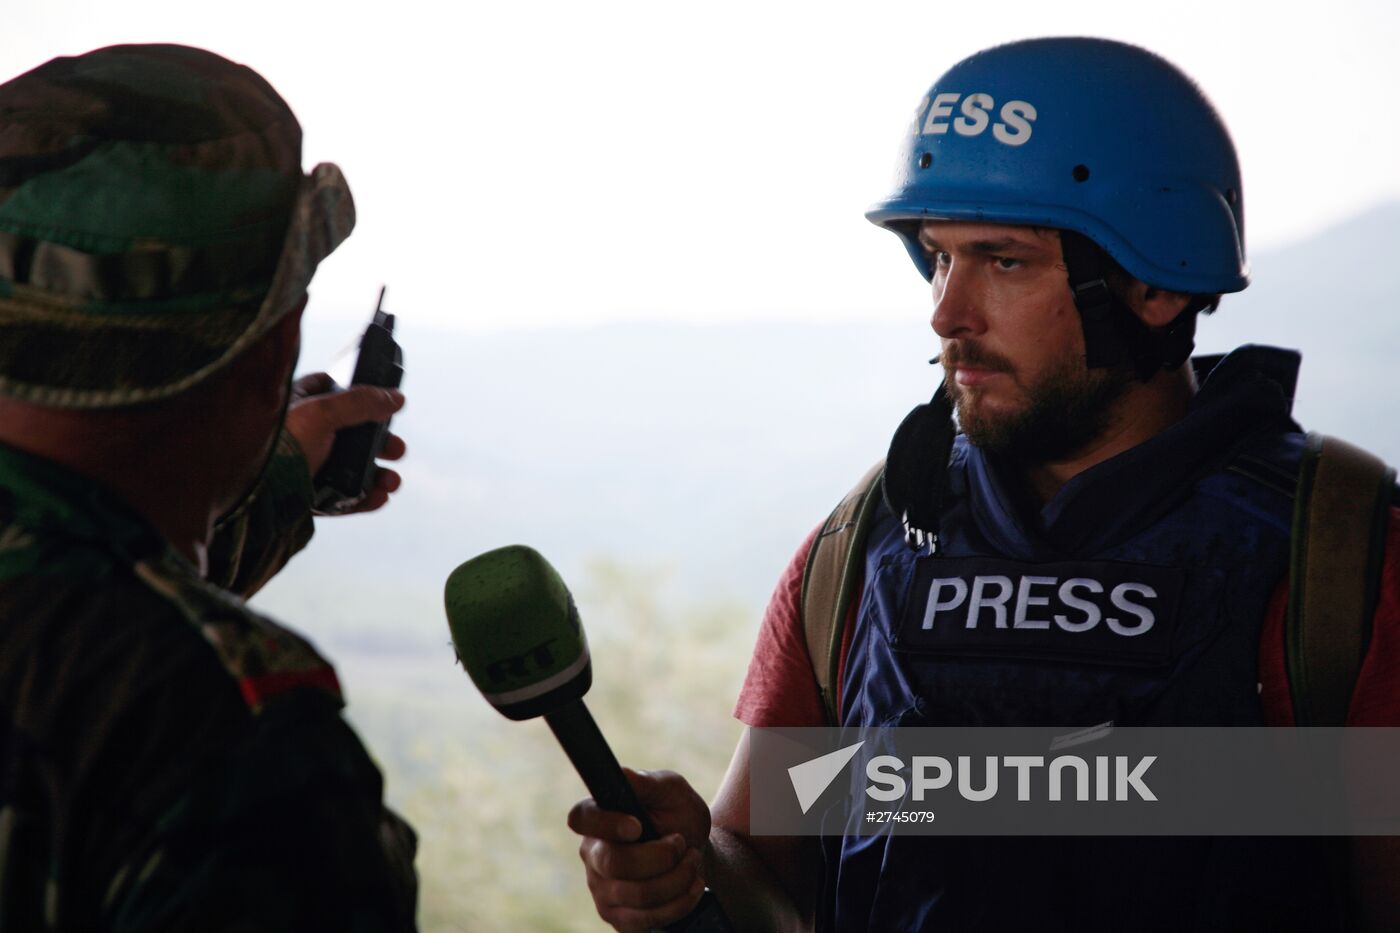 Russian journalists under fire in Syria